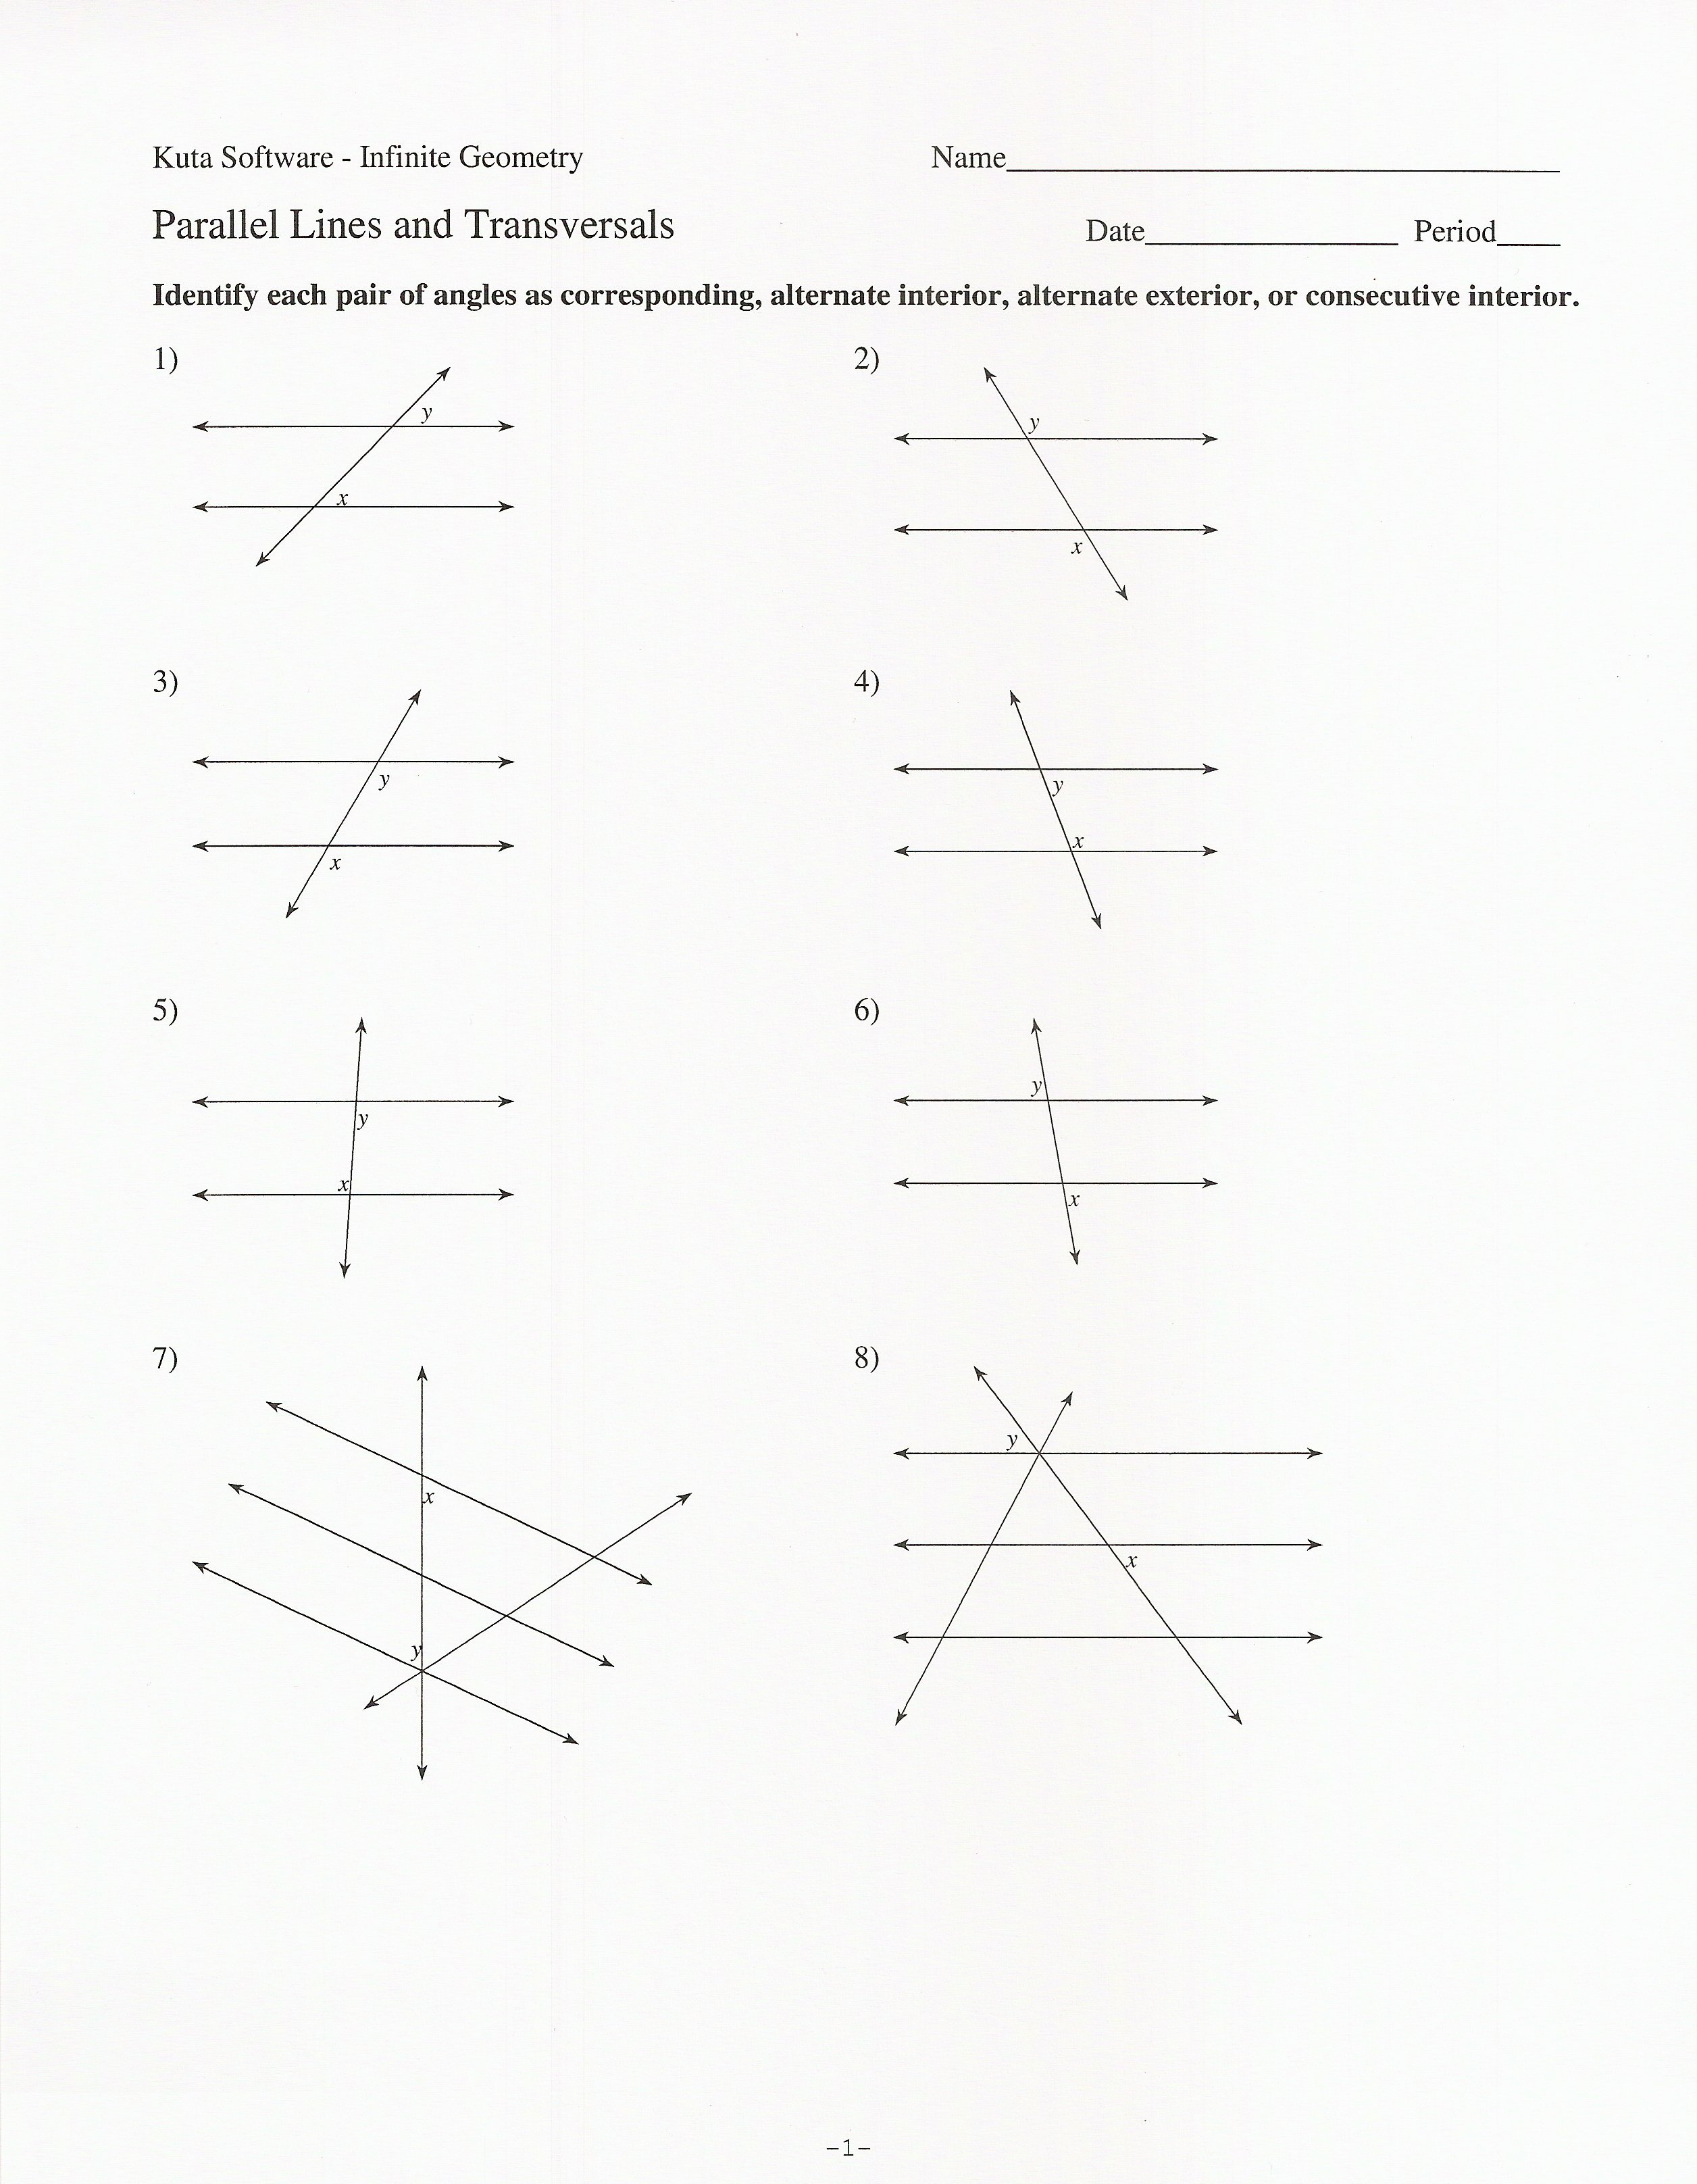 Bafea Proving Parallel Lines Worksheet With Answers Great Books Throughout Parallel Lines Cut By A Transversal Worksheet Answer Key